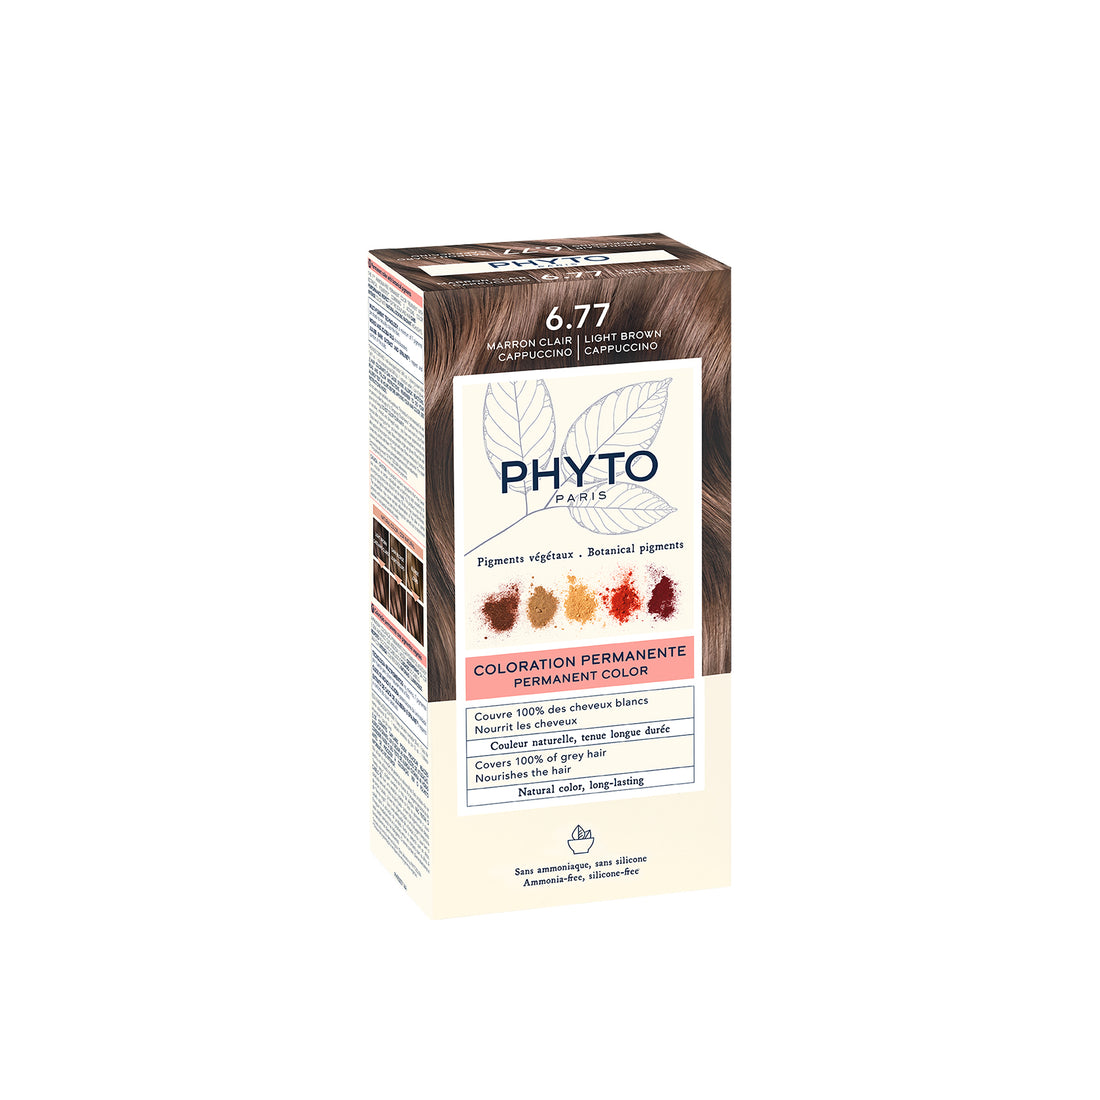 Phytocolor Permanent Color Shade 6.77 Light Brown Cappuccino